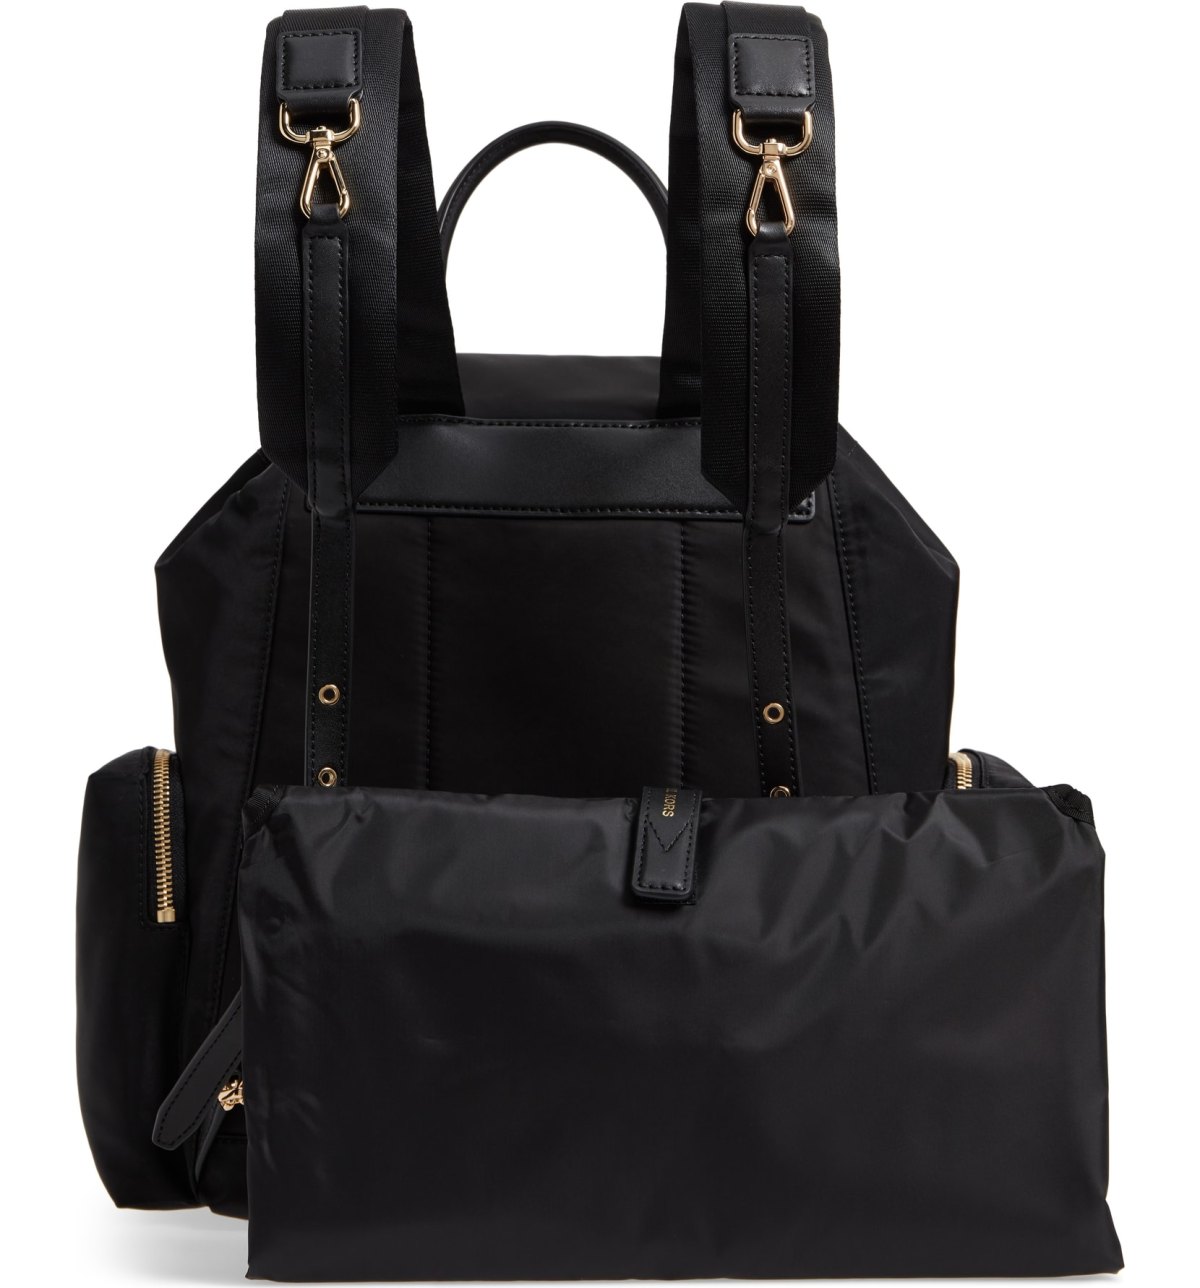 This Michael Kors Backpack Is Actually a Stylish Diaper Bag